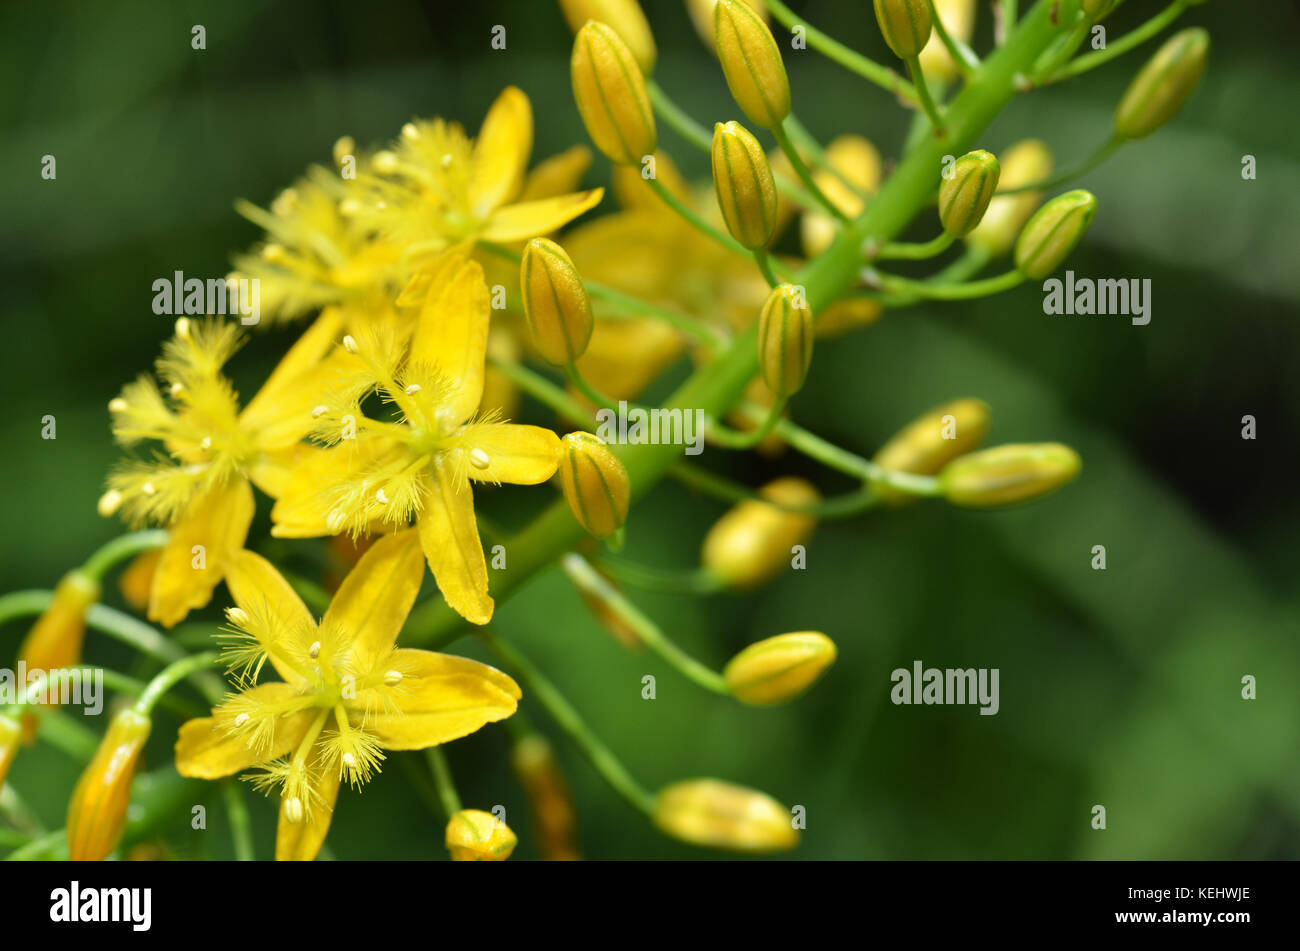 South African plant Bulbine natalensis also known with common name Bulbine Stock Photo